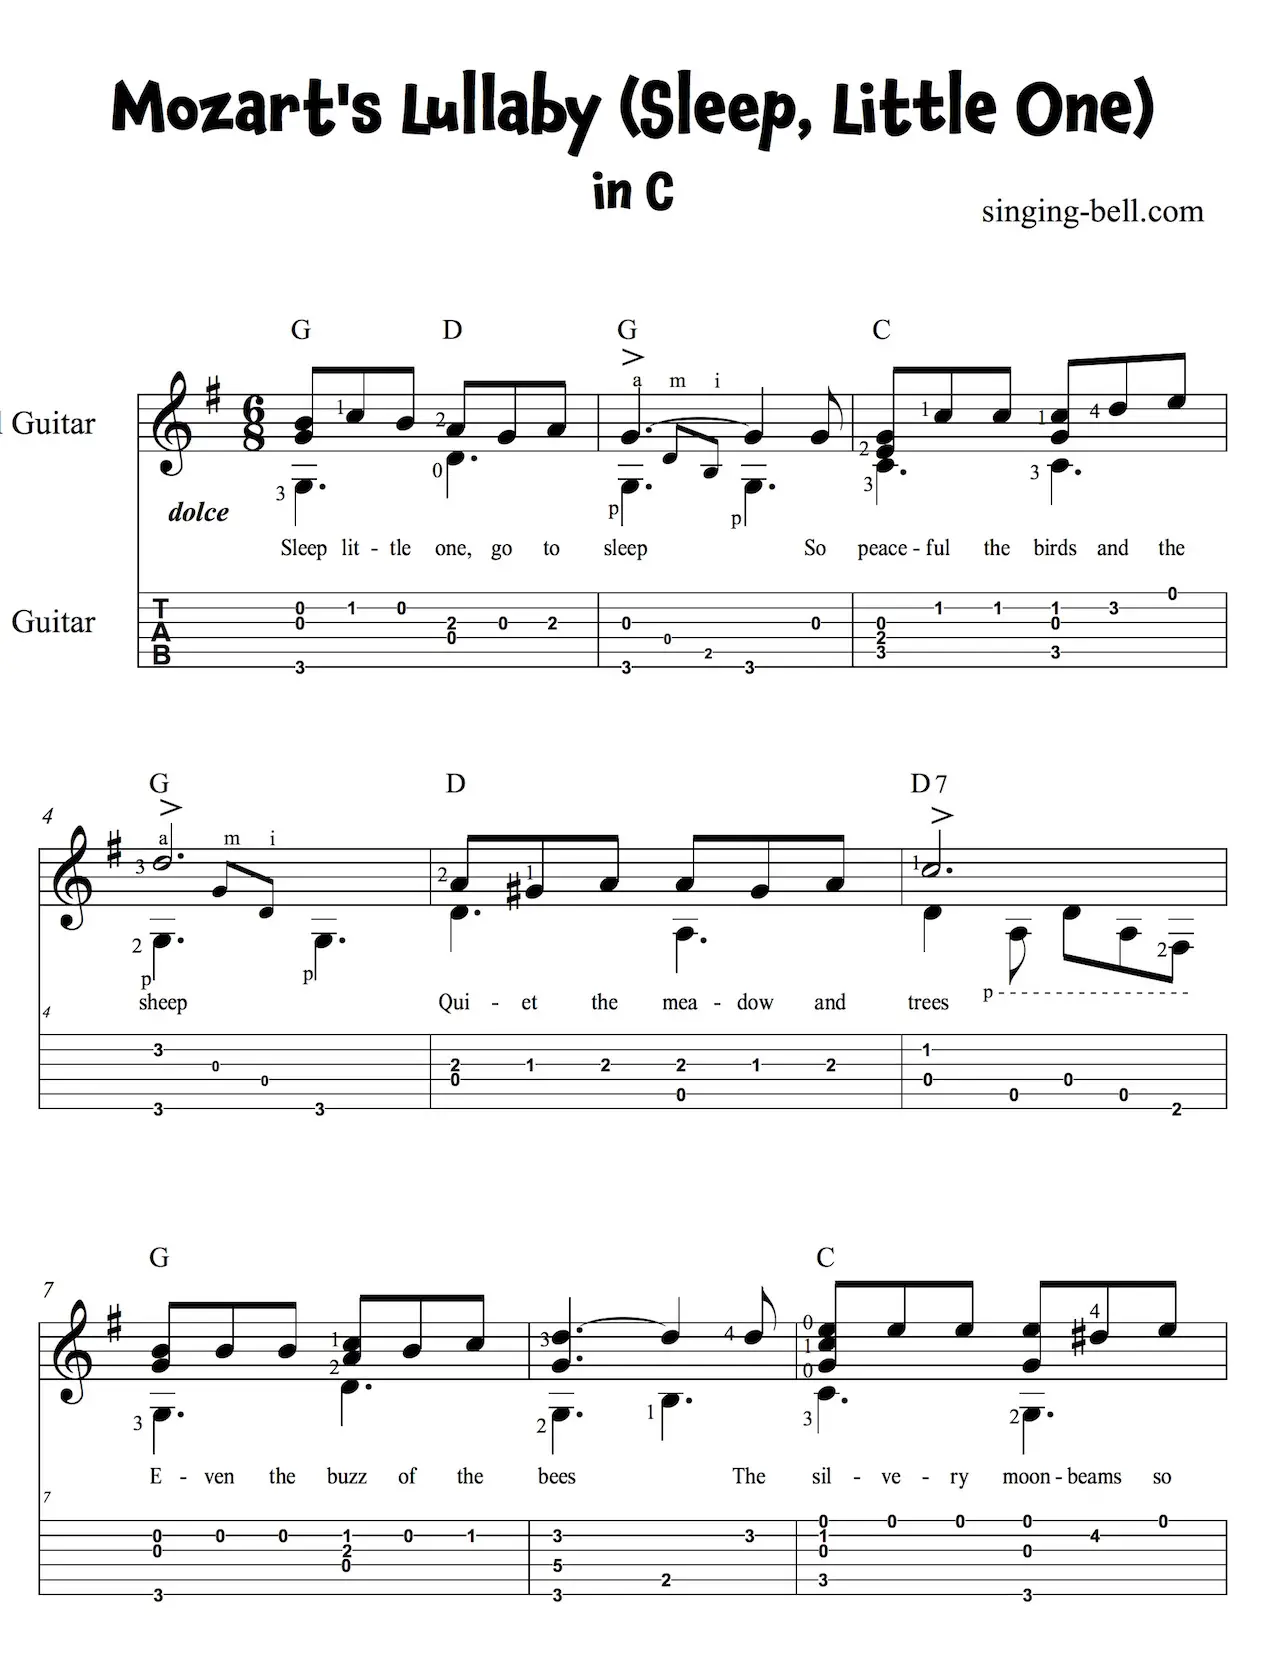 Mozart's Lullaby - Sleep Little One - Easy Guitar Sheet Music with Notes and Tablature page 1.